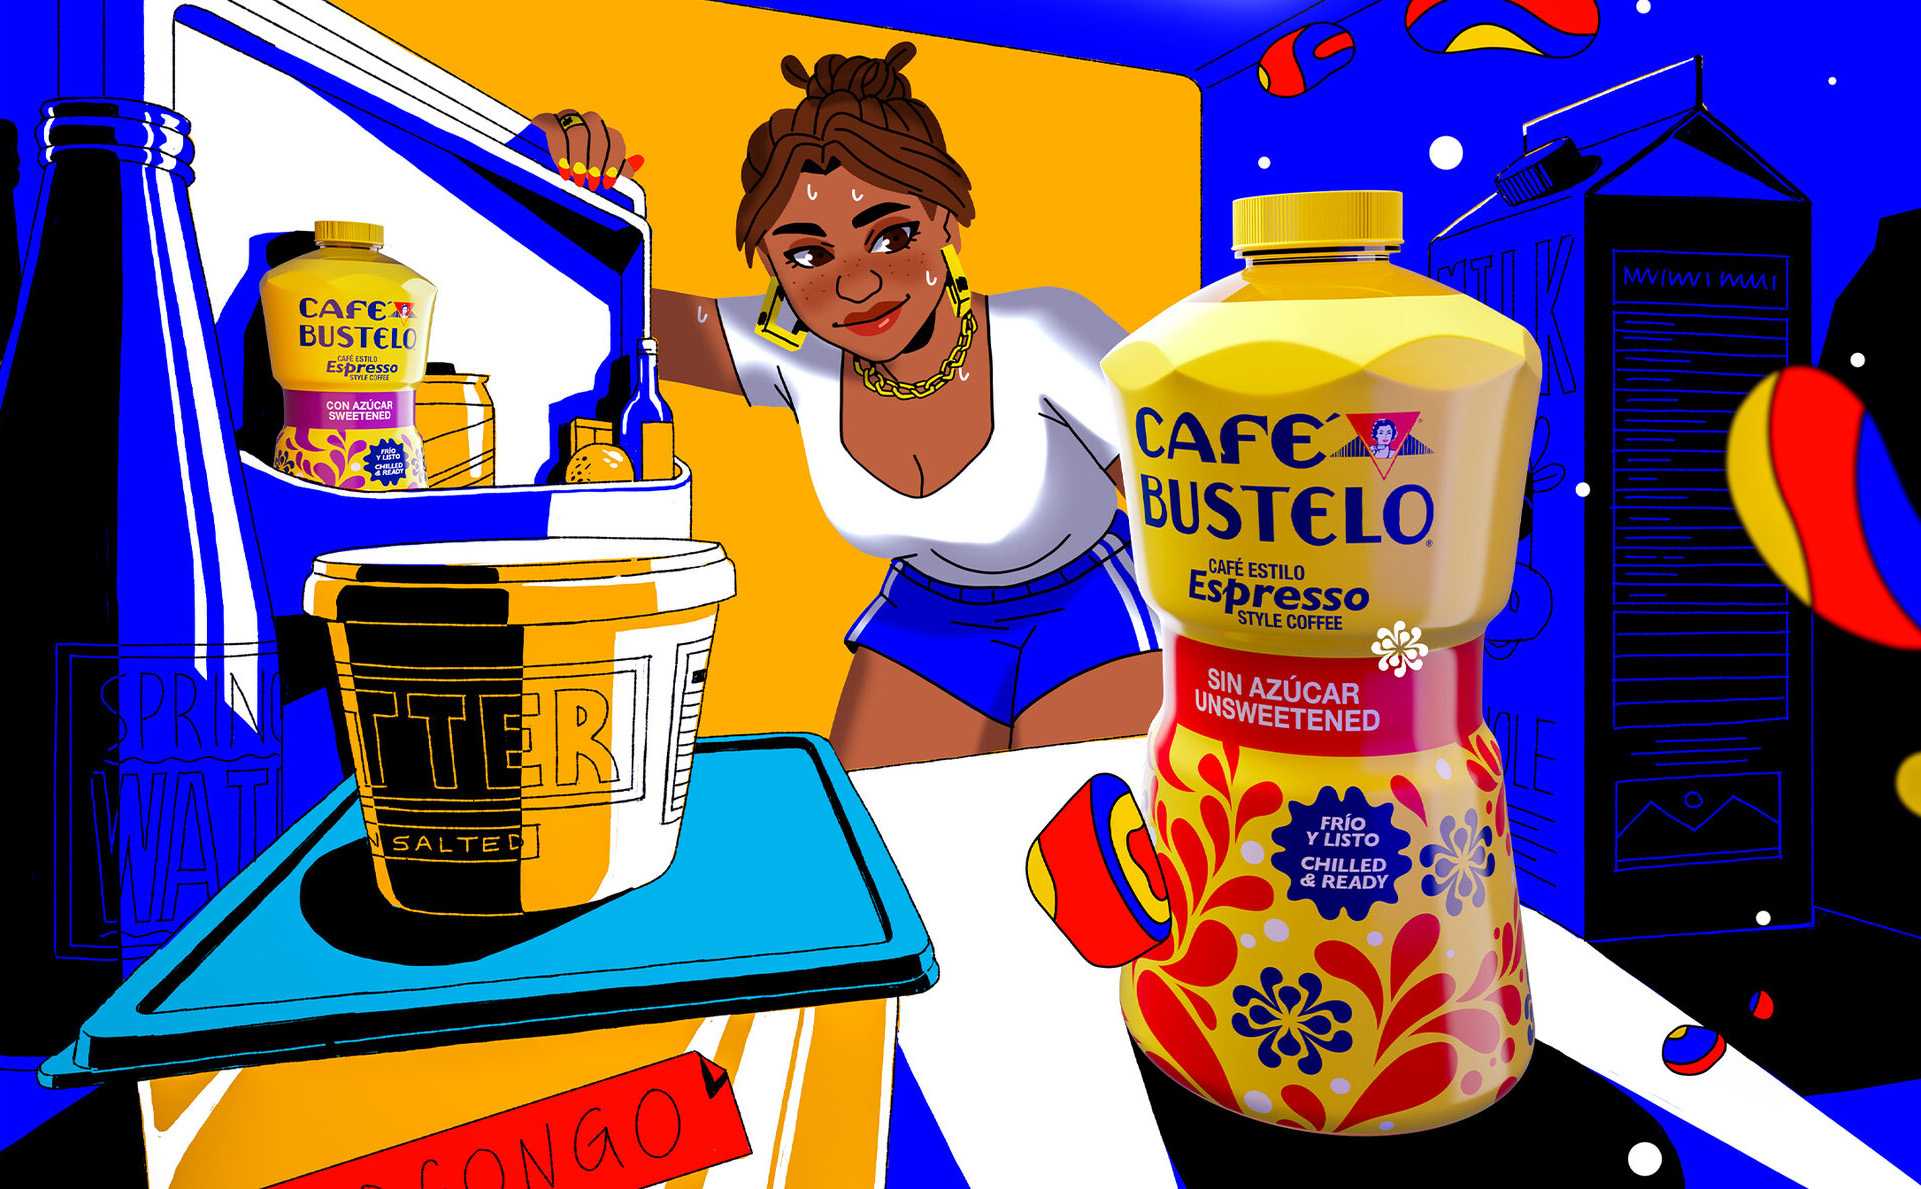 Cafe Bustelo’s New Line Of Iced Coffee Gives Shout Out To Stovetop Espresso Makers With Bottle Design